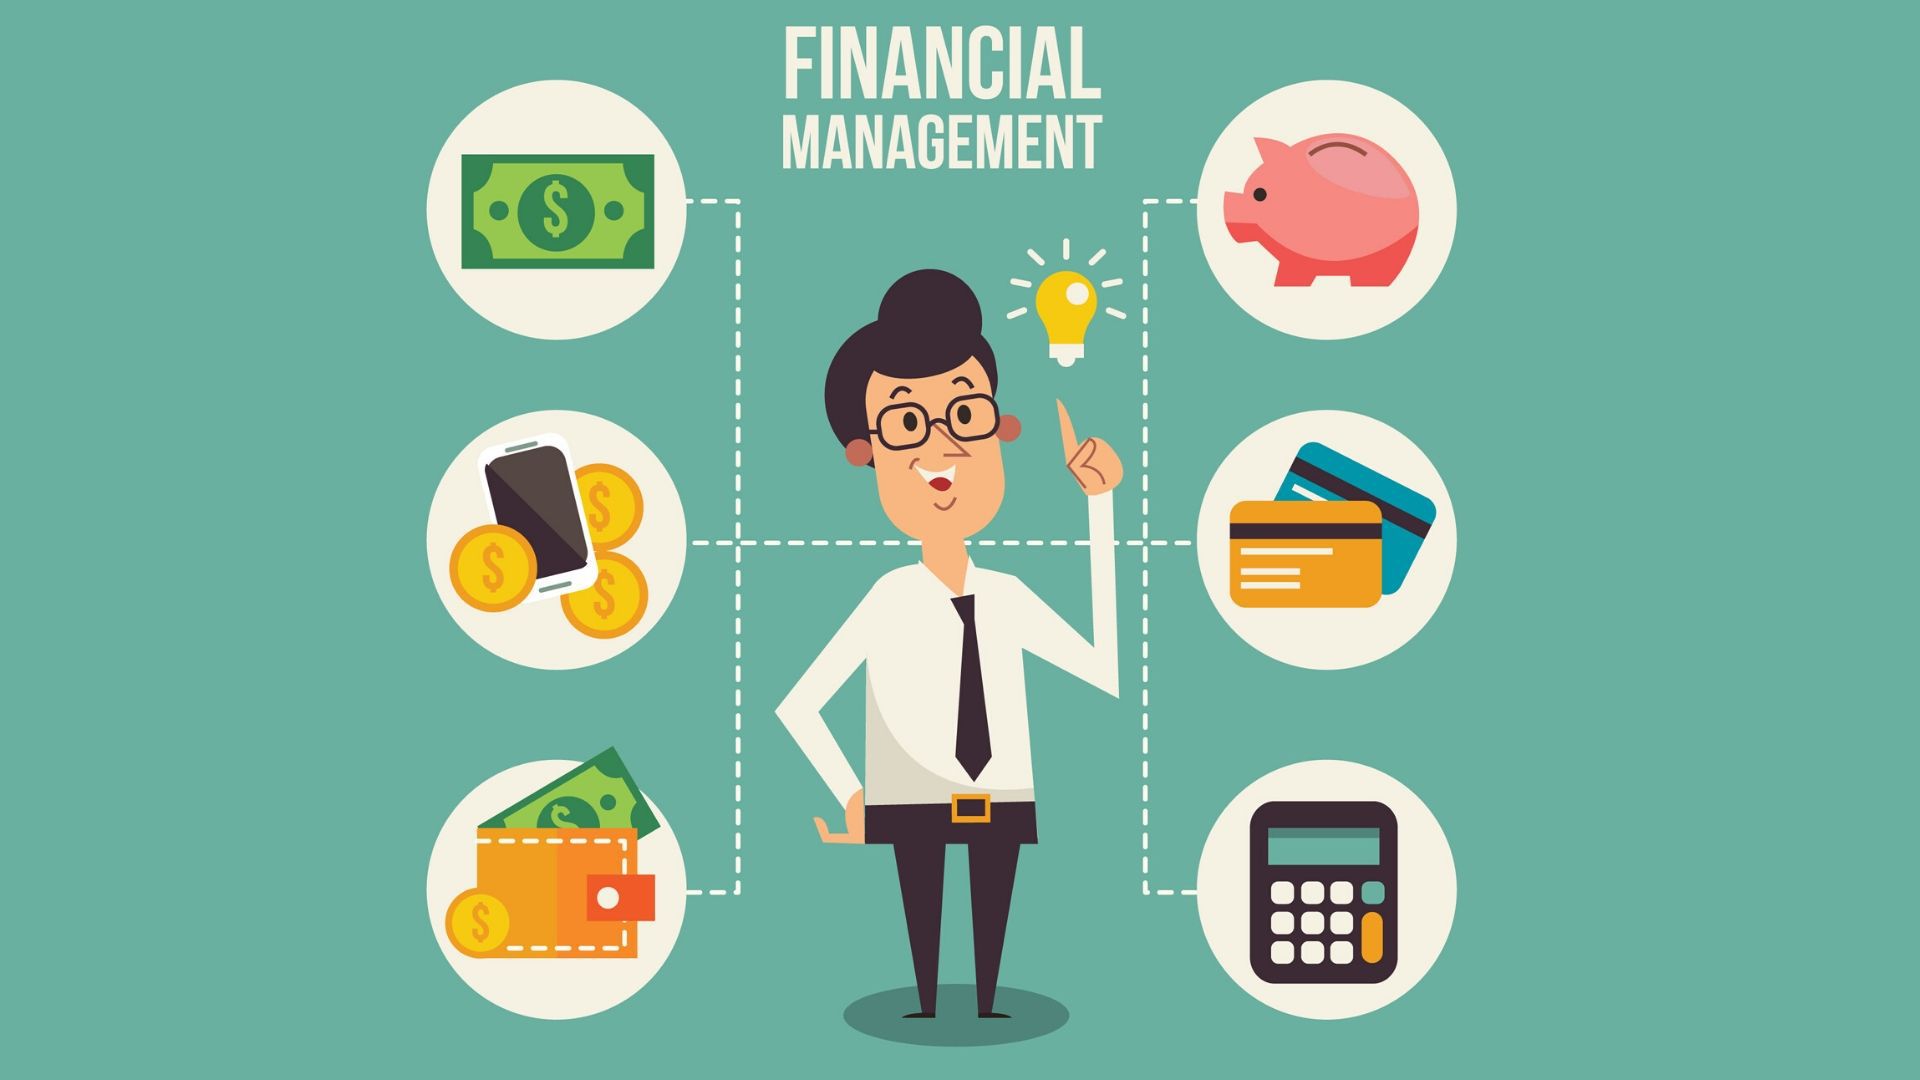 Financial Management - Objectives And Elements | Marketing91